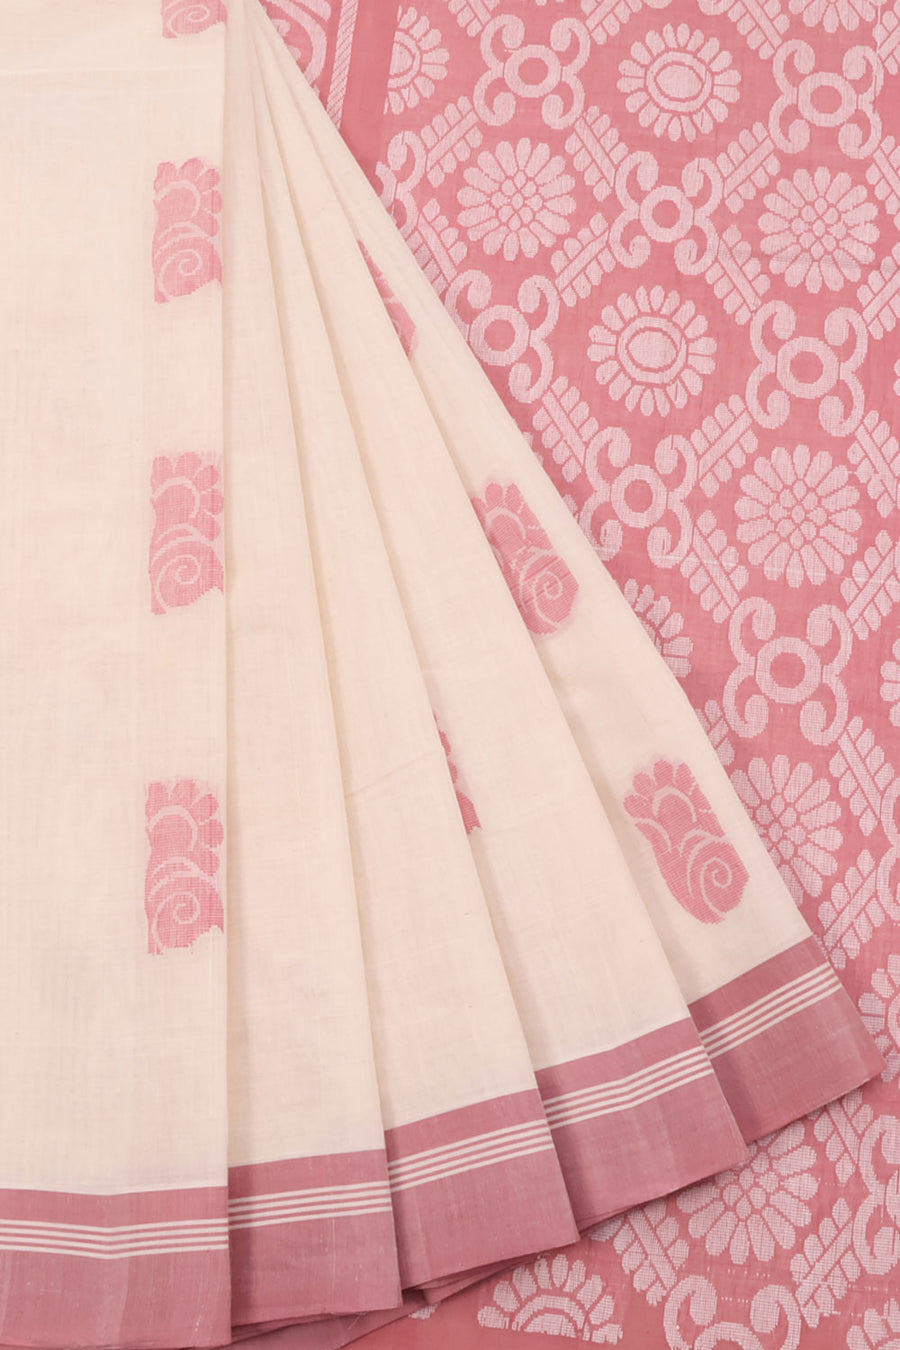 Handwoven Kanchi Cotton Saree with Floral Motifs Design and Contrast Pallu